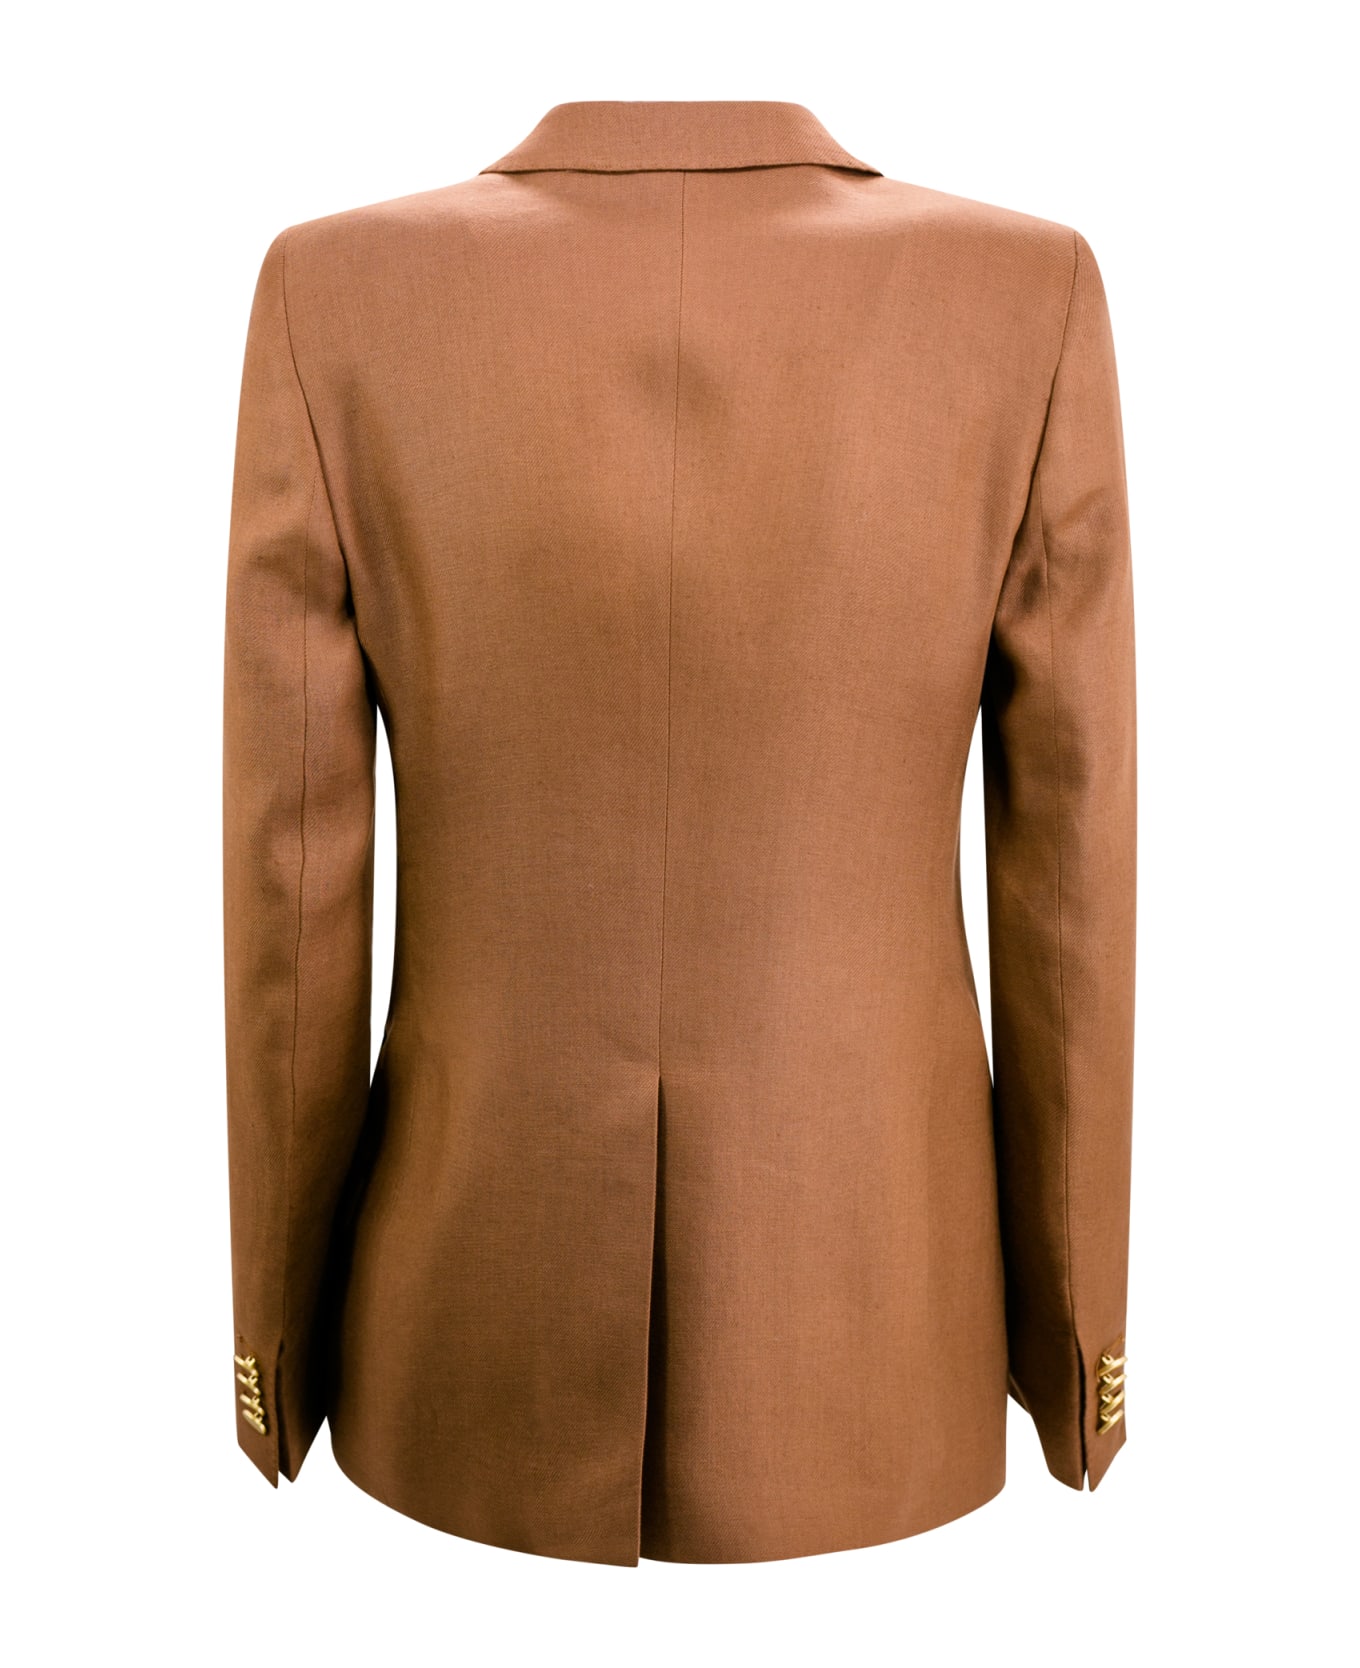 Tagliatore Full Suit With Double-breasted Blazer With Peaked Lapels And Straight Pants. - Brown